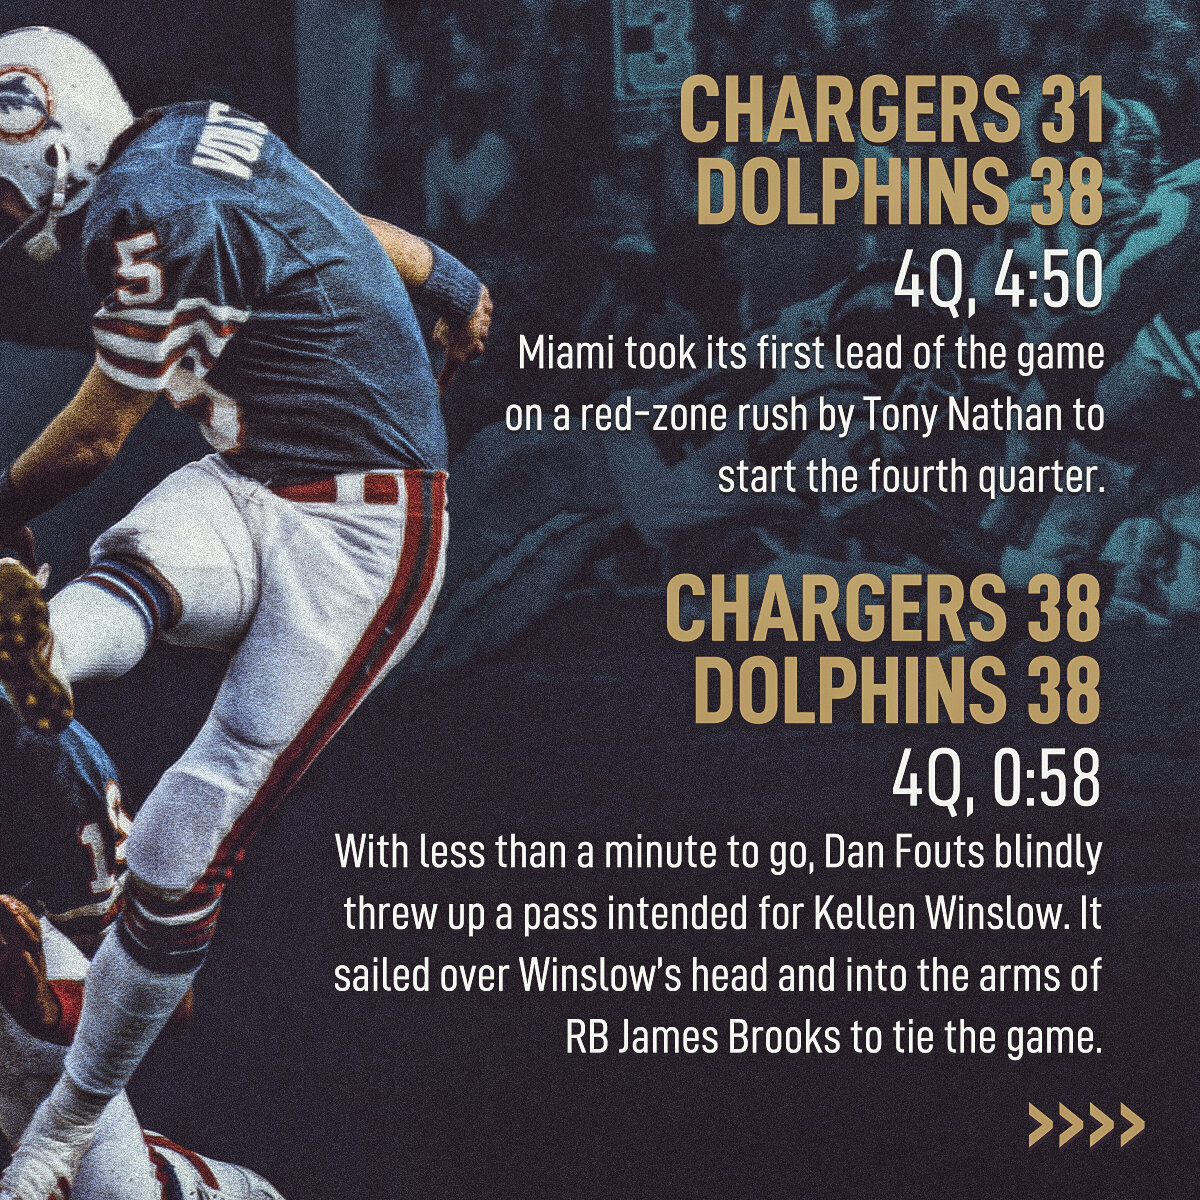 190924_NFL_GreatestGames_ChargersDolphins_Carousel_SO_04.jpg